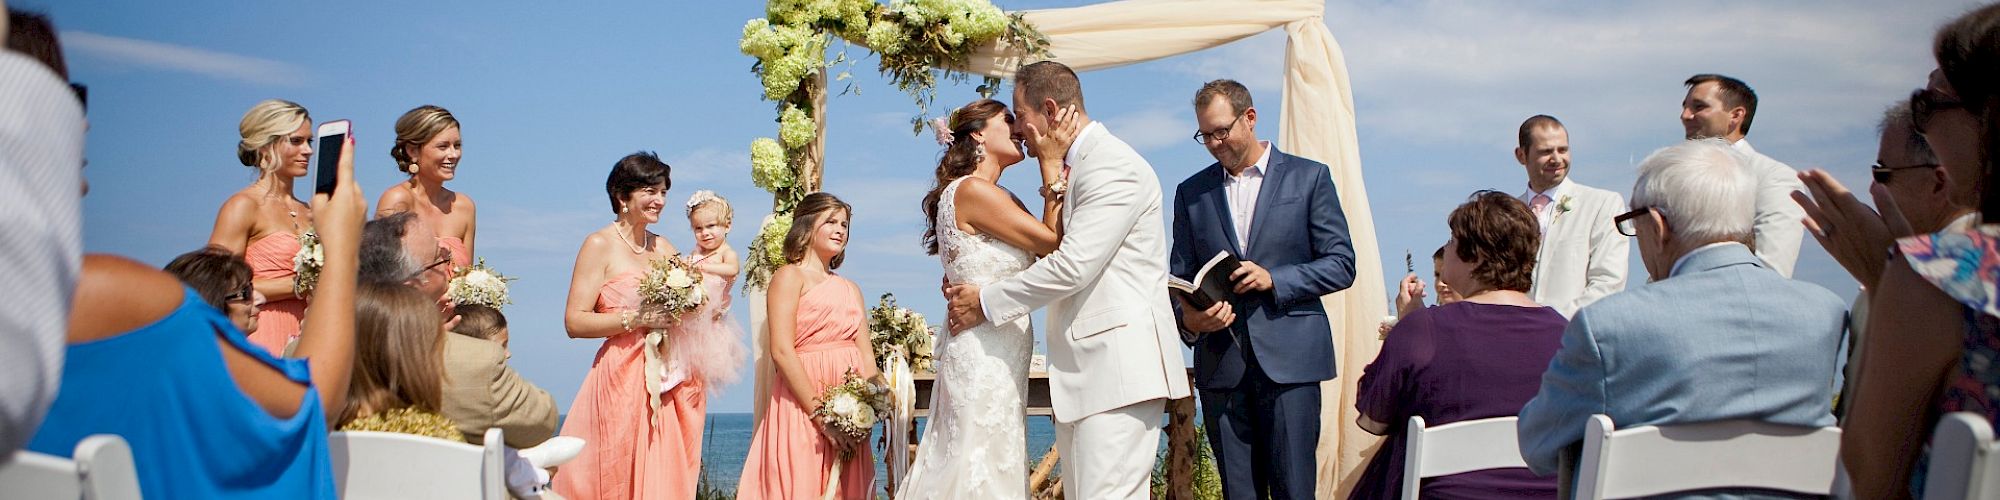 A bride and groom share a kiss at an outdoor wedding ceremony, surrounded by bridesmaids in peach dresses and guests seated on white chairs.